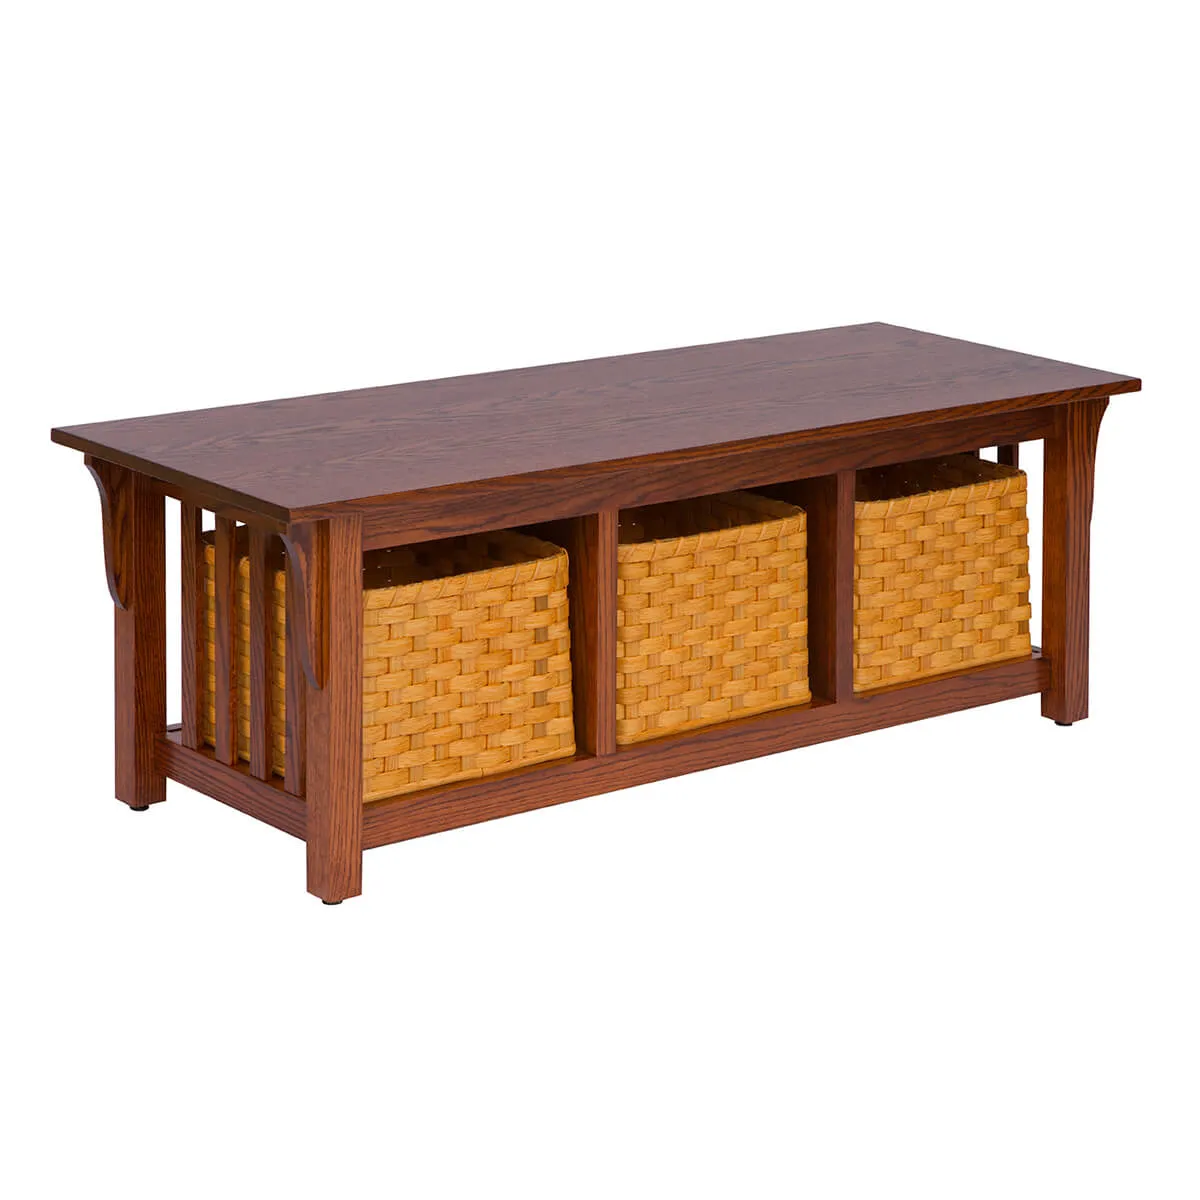 3 Basket Mission Bench or Coffee Table